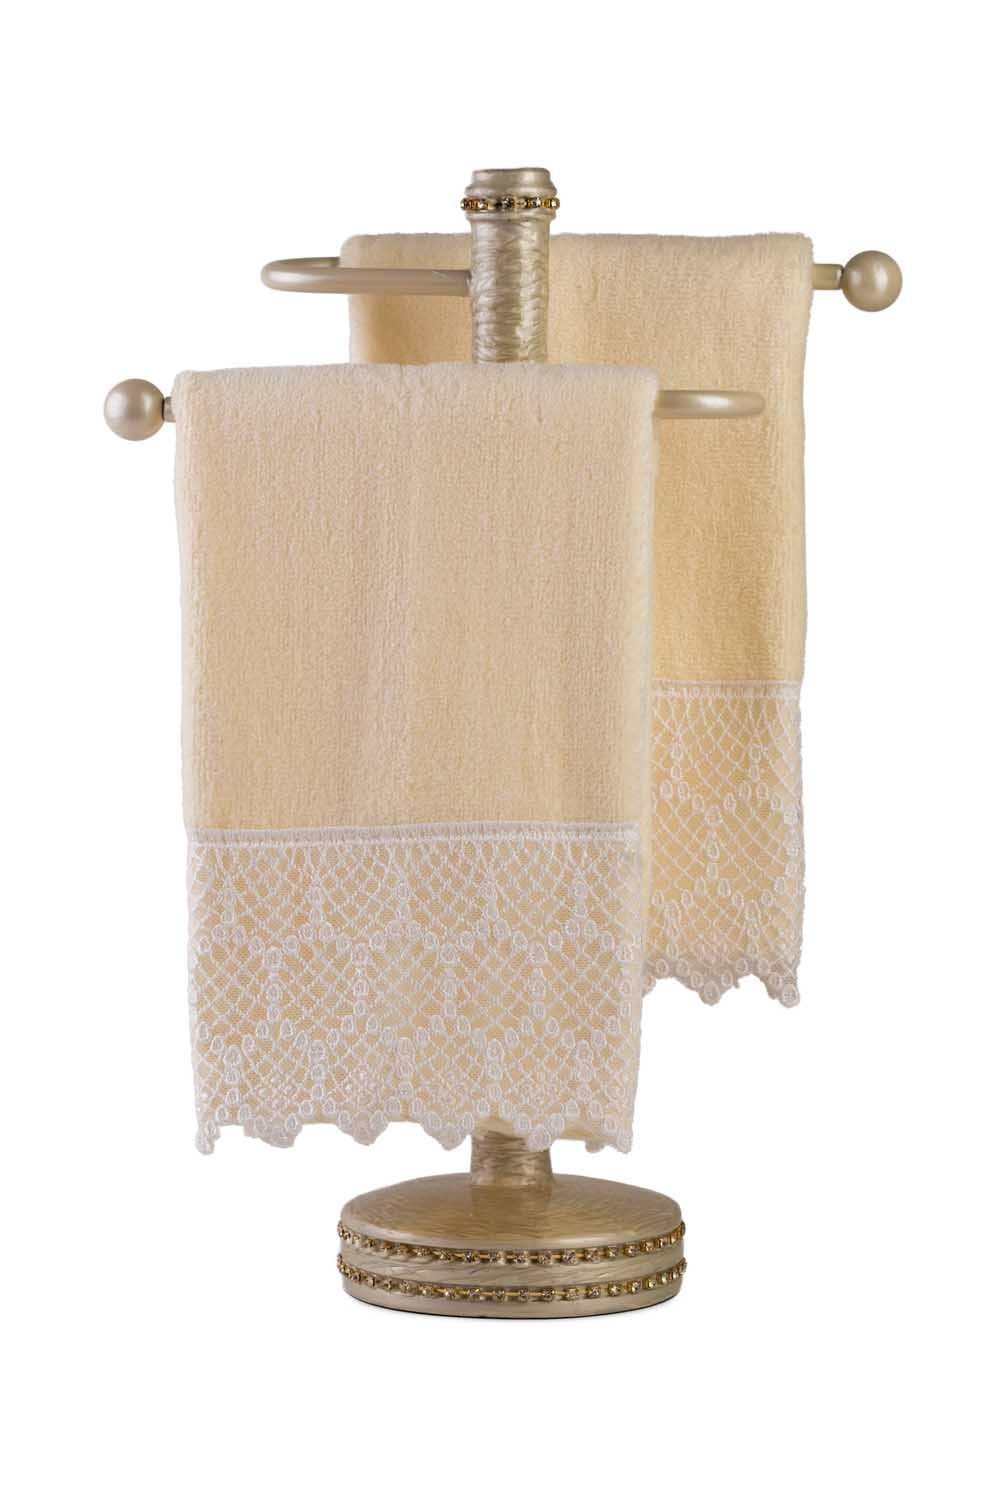 Creative Scents Cotton Velour Fingertip Towel in Cream Color With Cream Lace (set of 4)